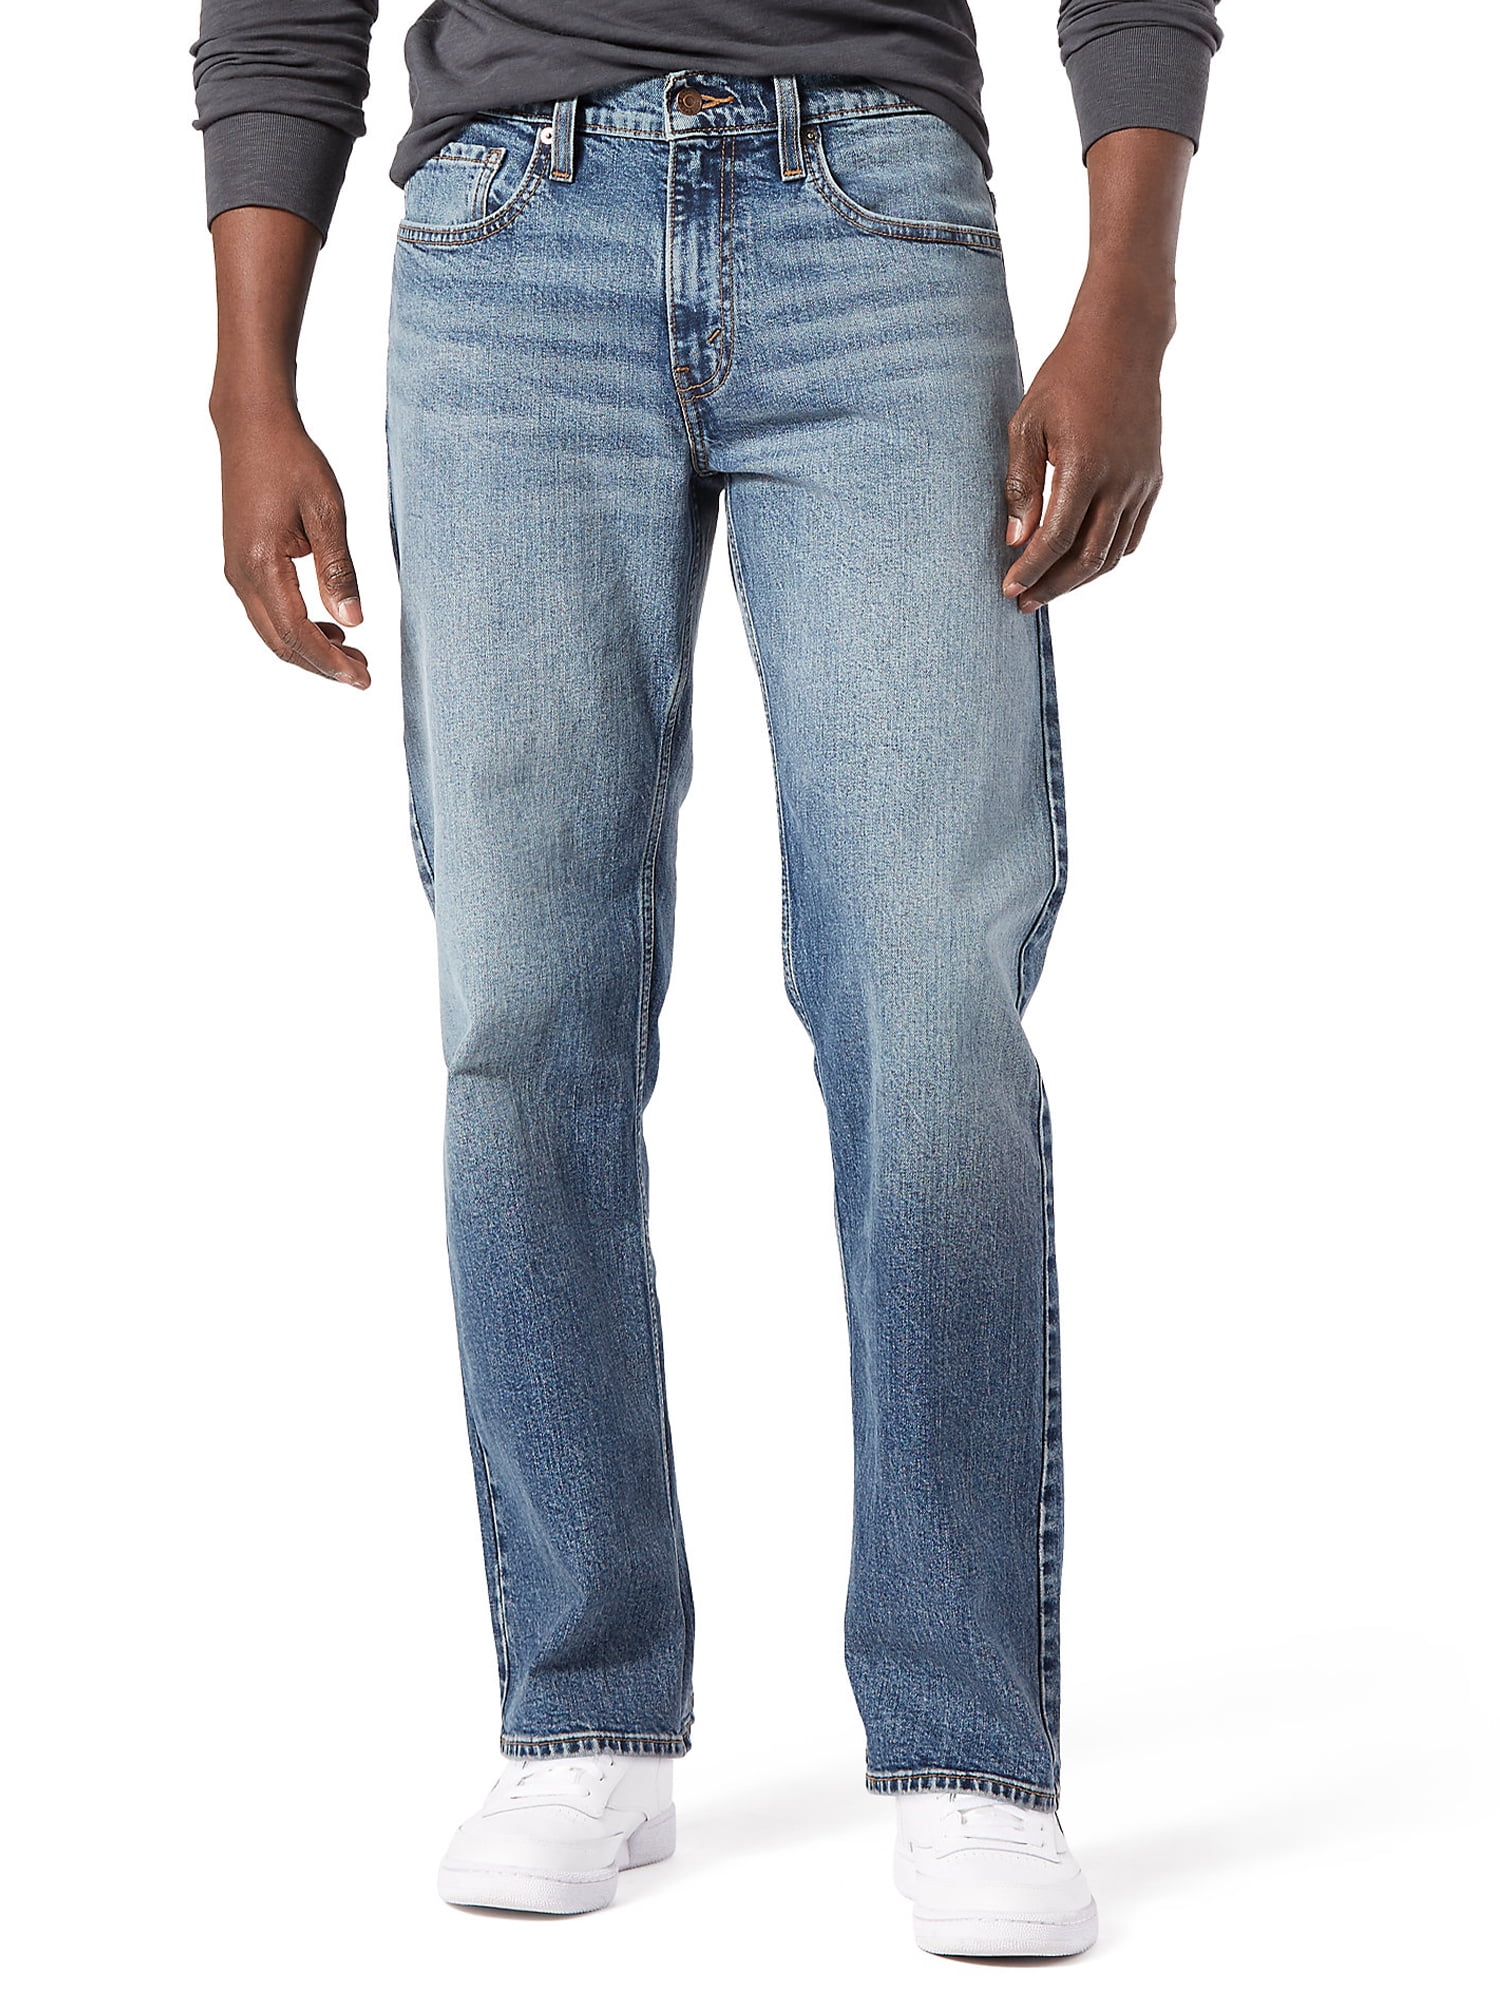 Signature by Levi Strauss & Co. Men's and Big and Tall Loose Fit Jeans ...